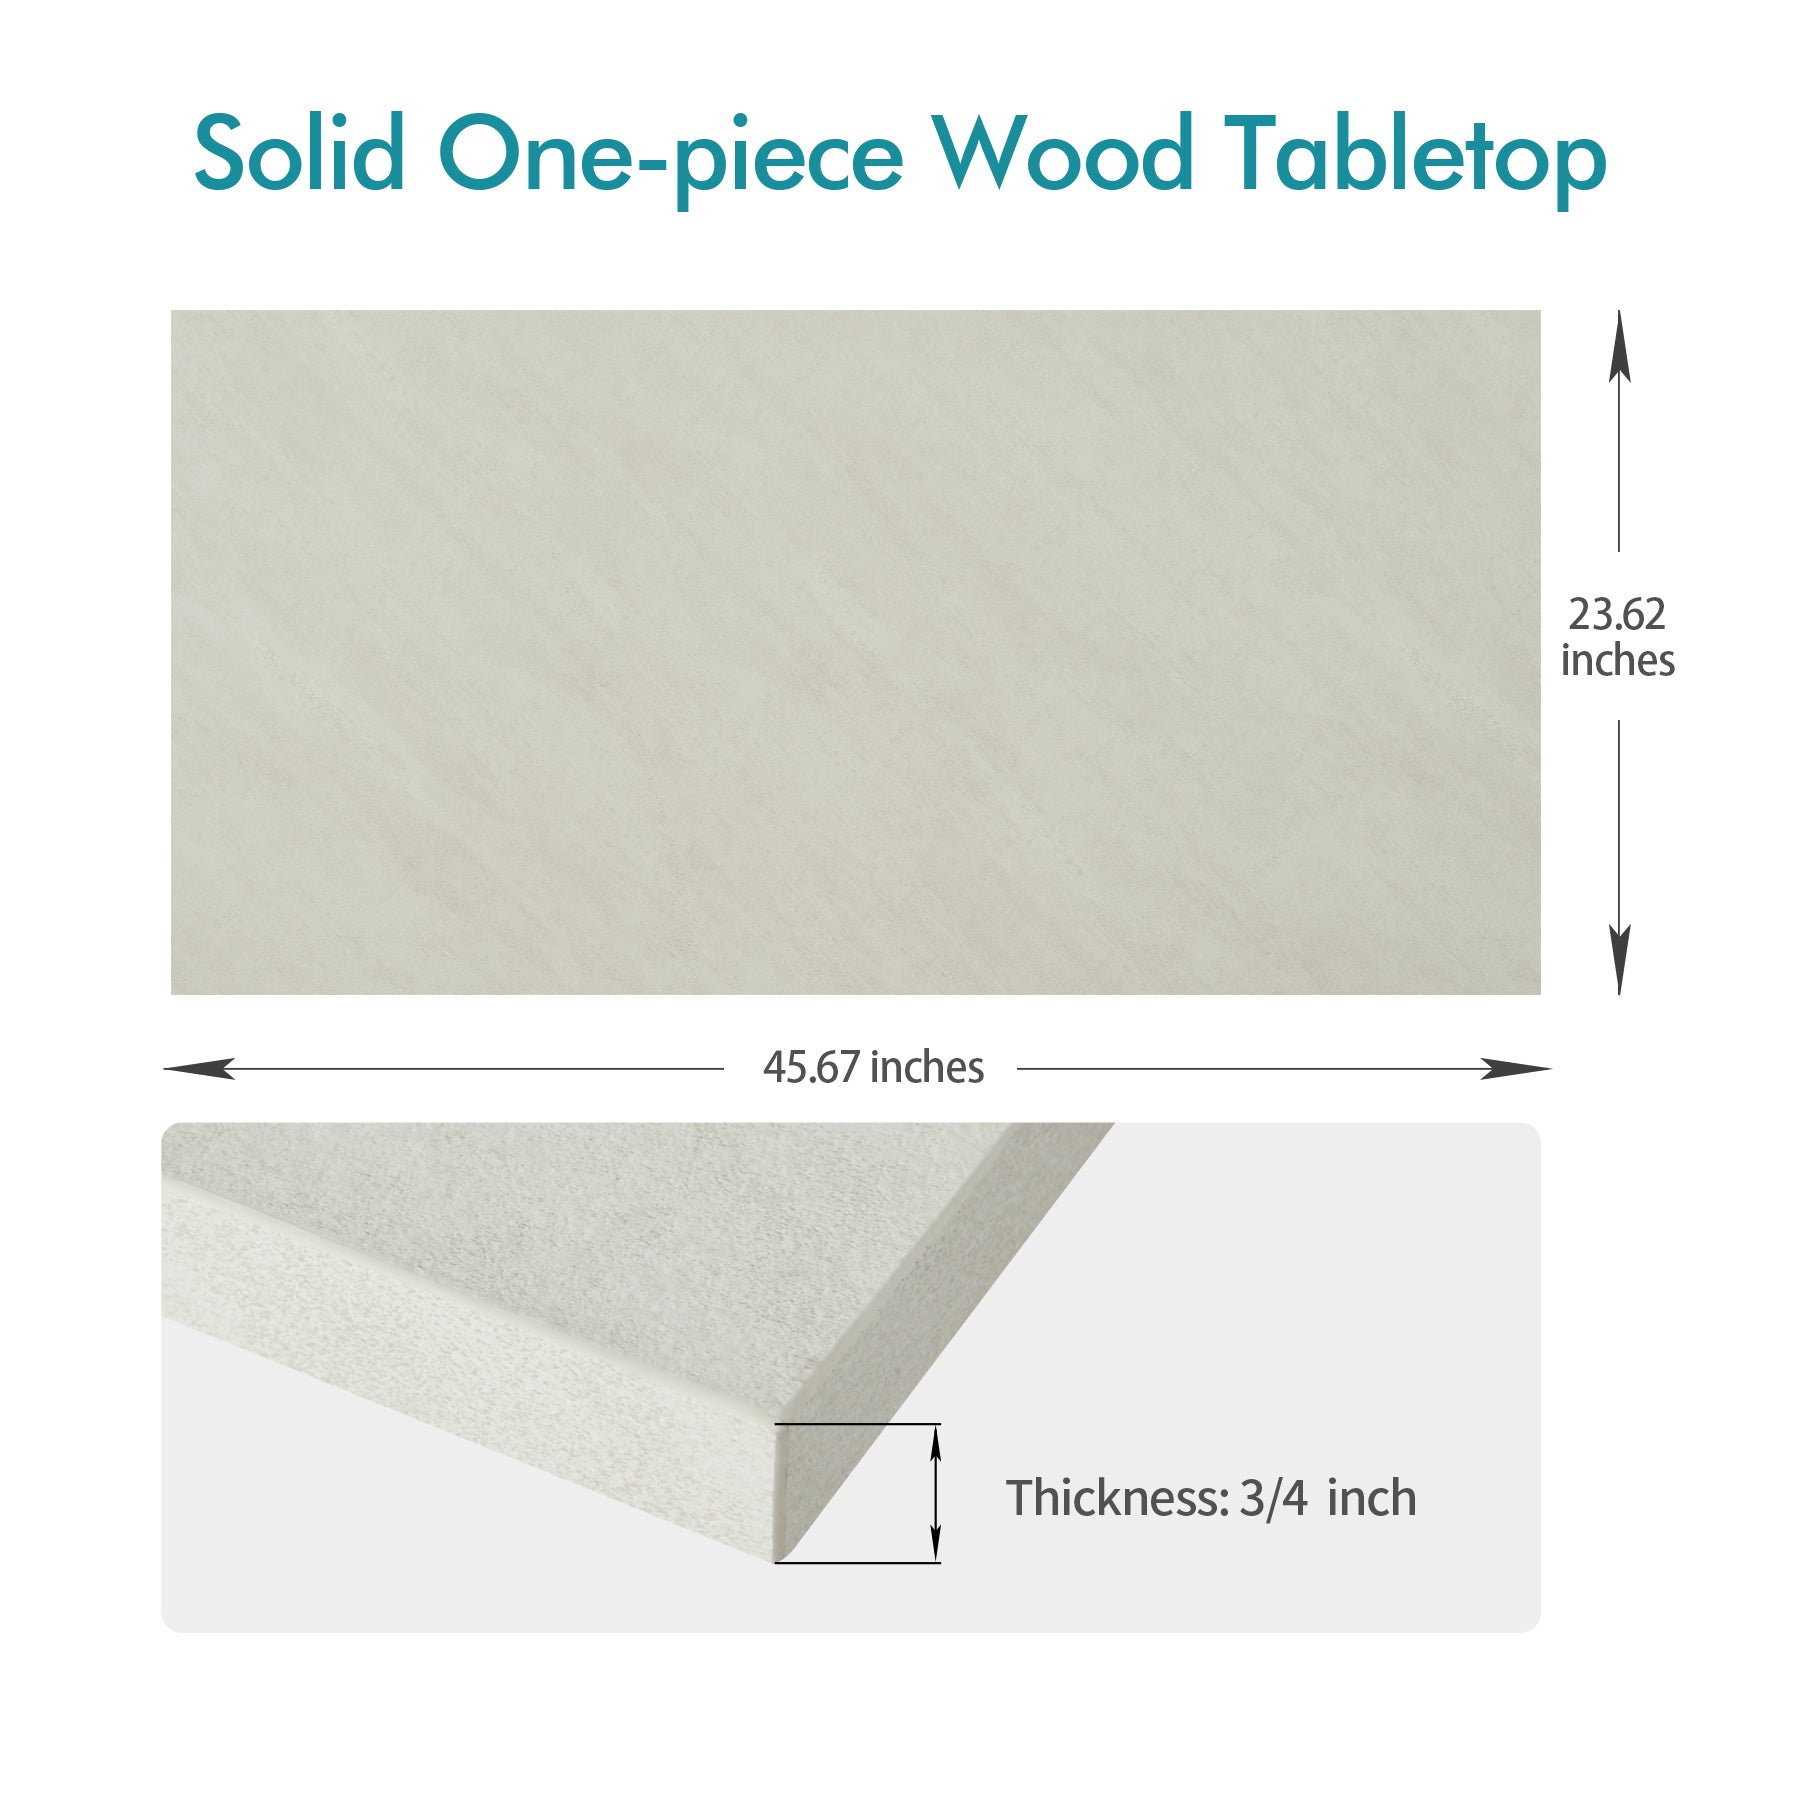 46x24 one-piece wood table top in white